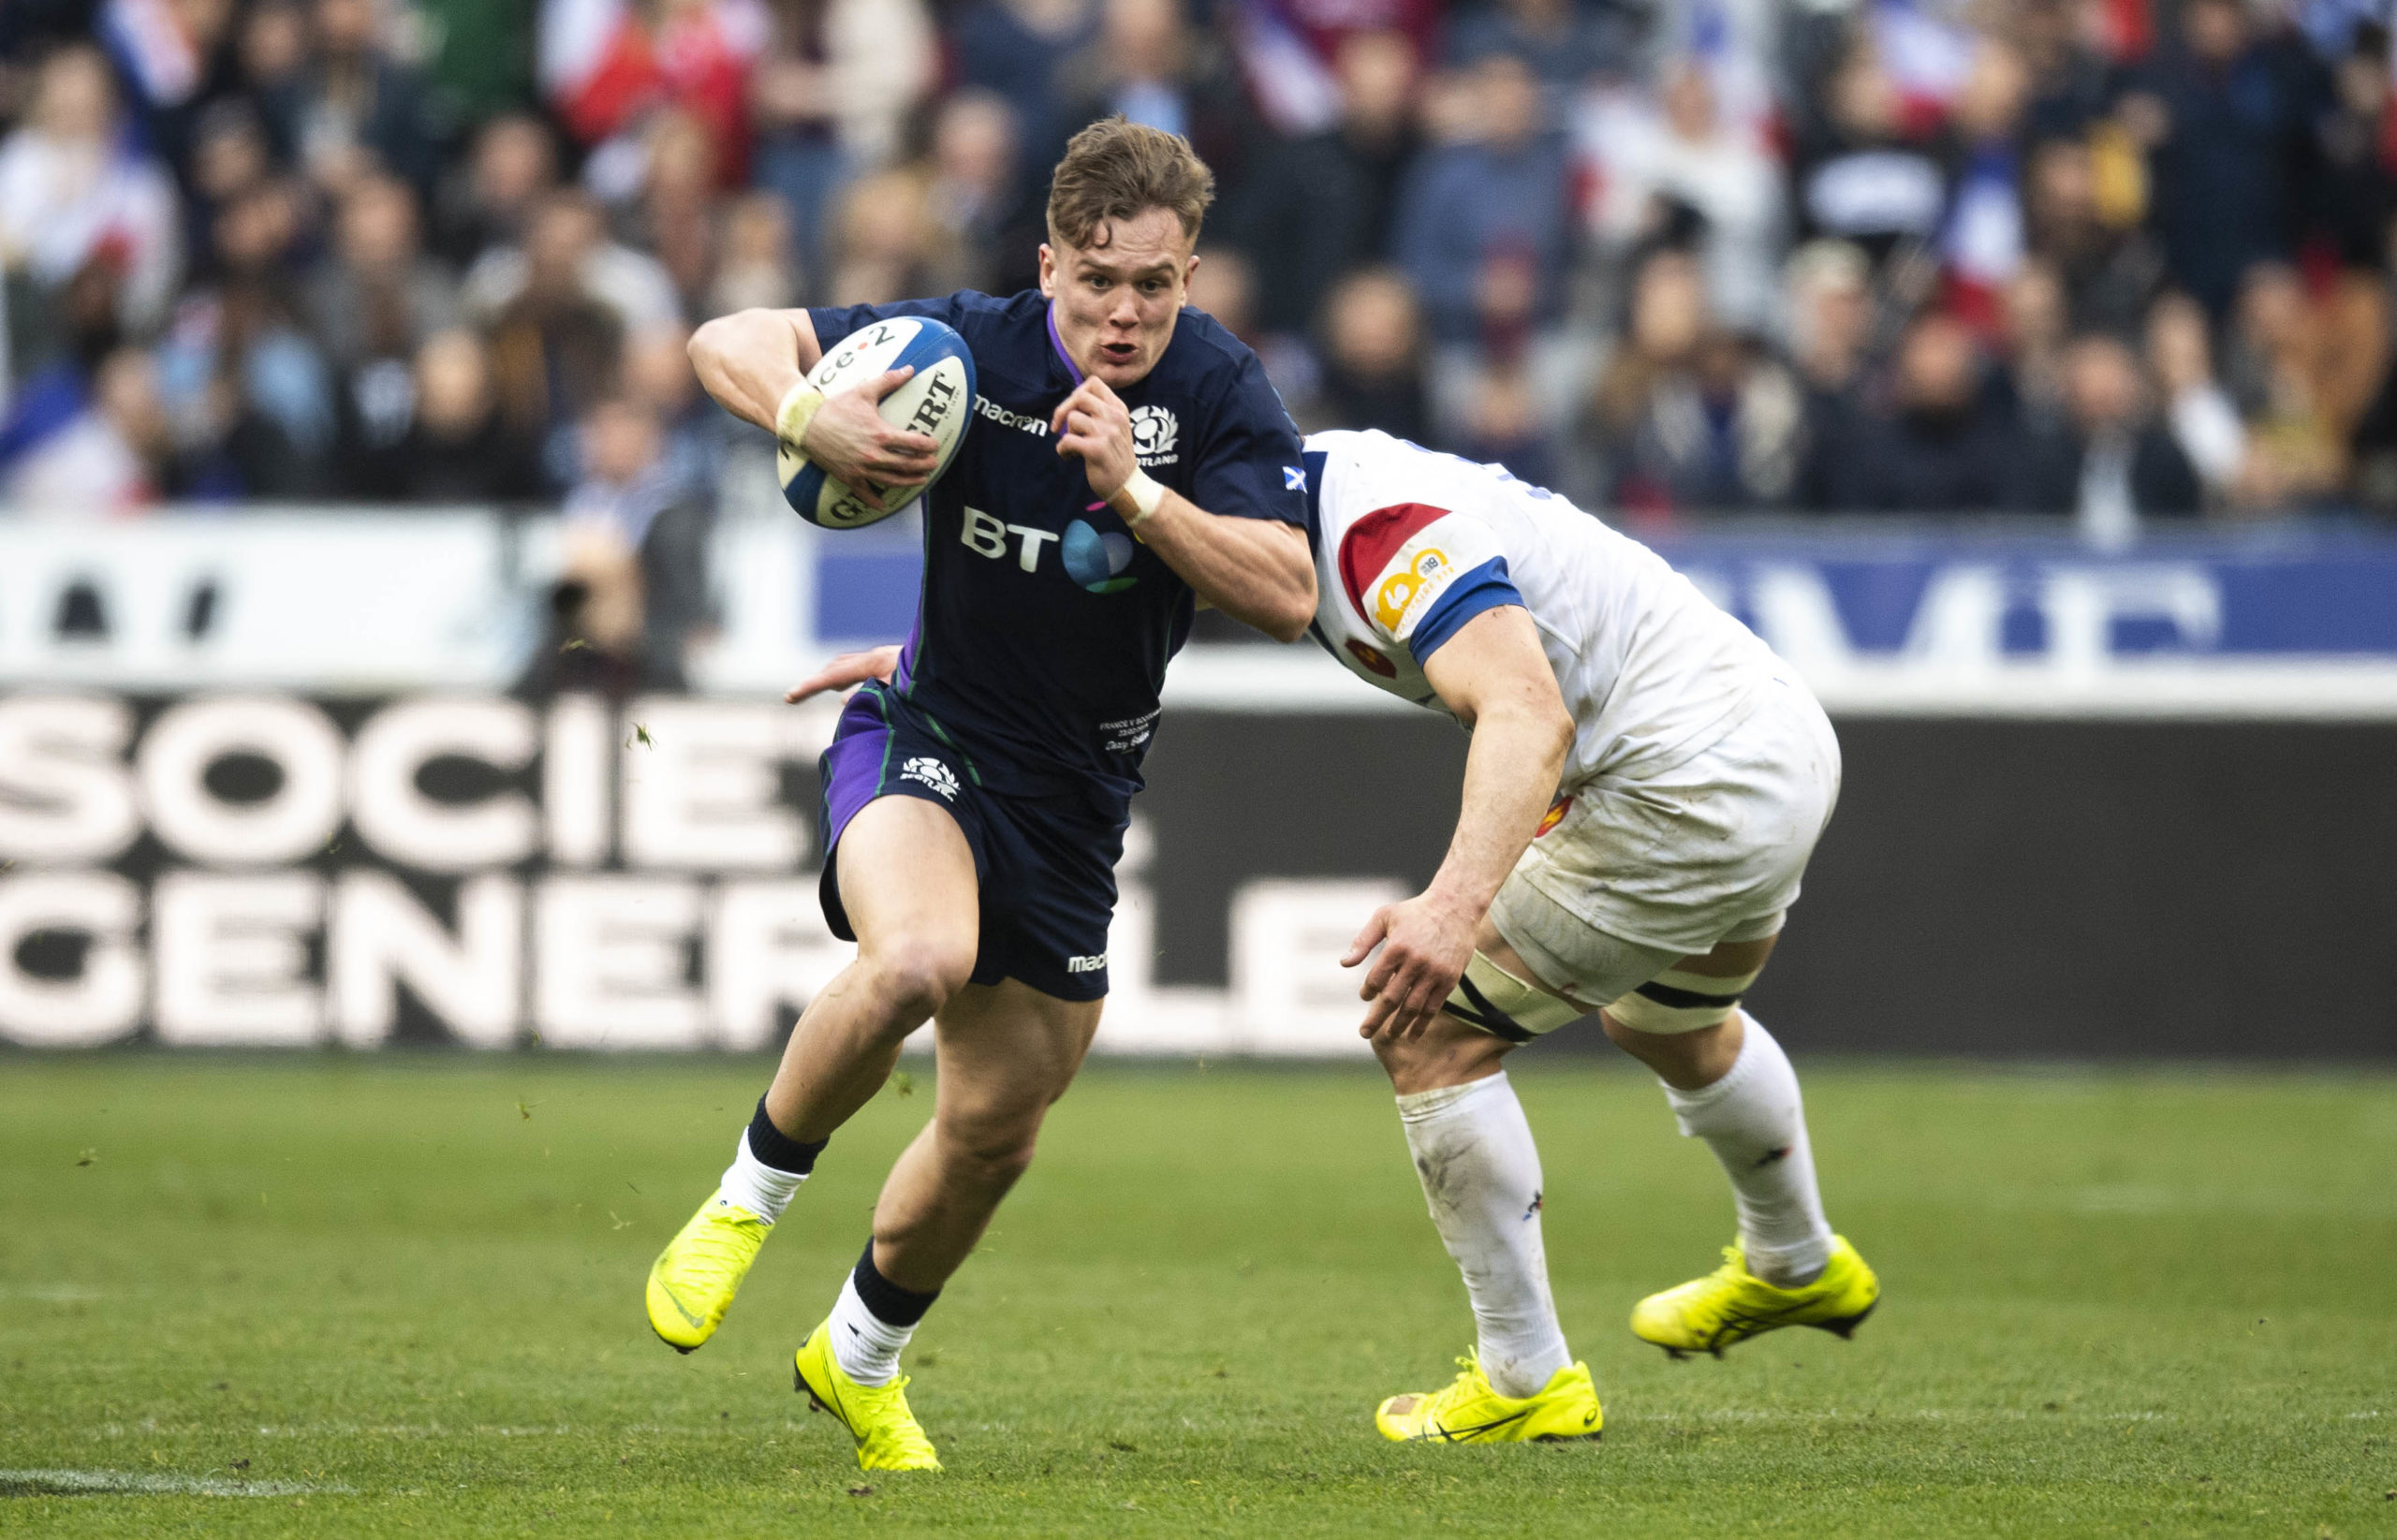 Darcy Graham is one of Scotland's most successful development players in recent years.